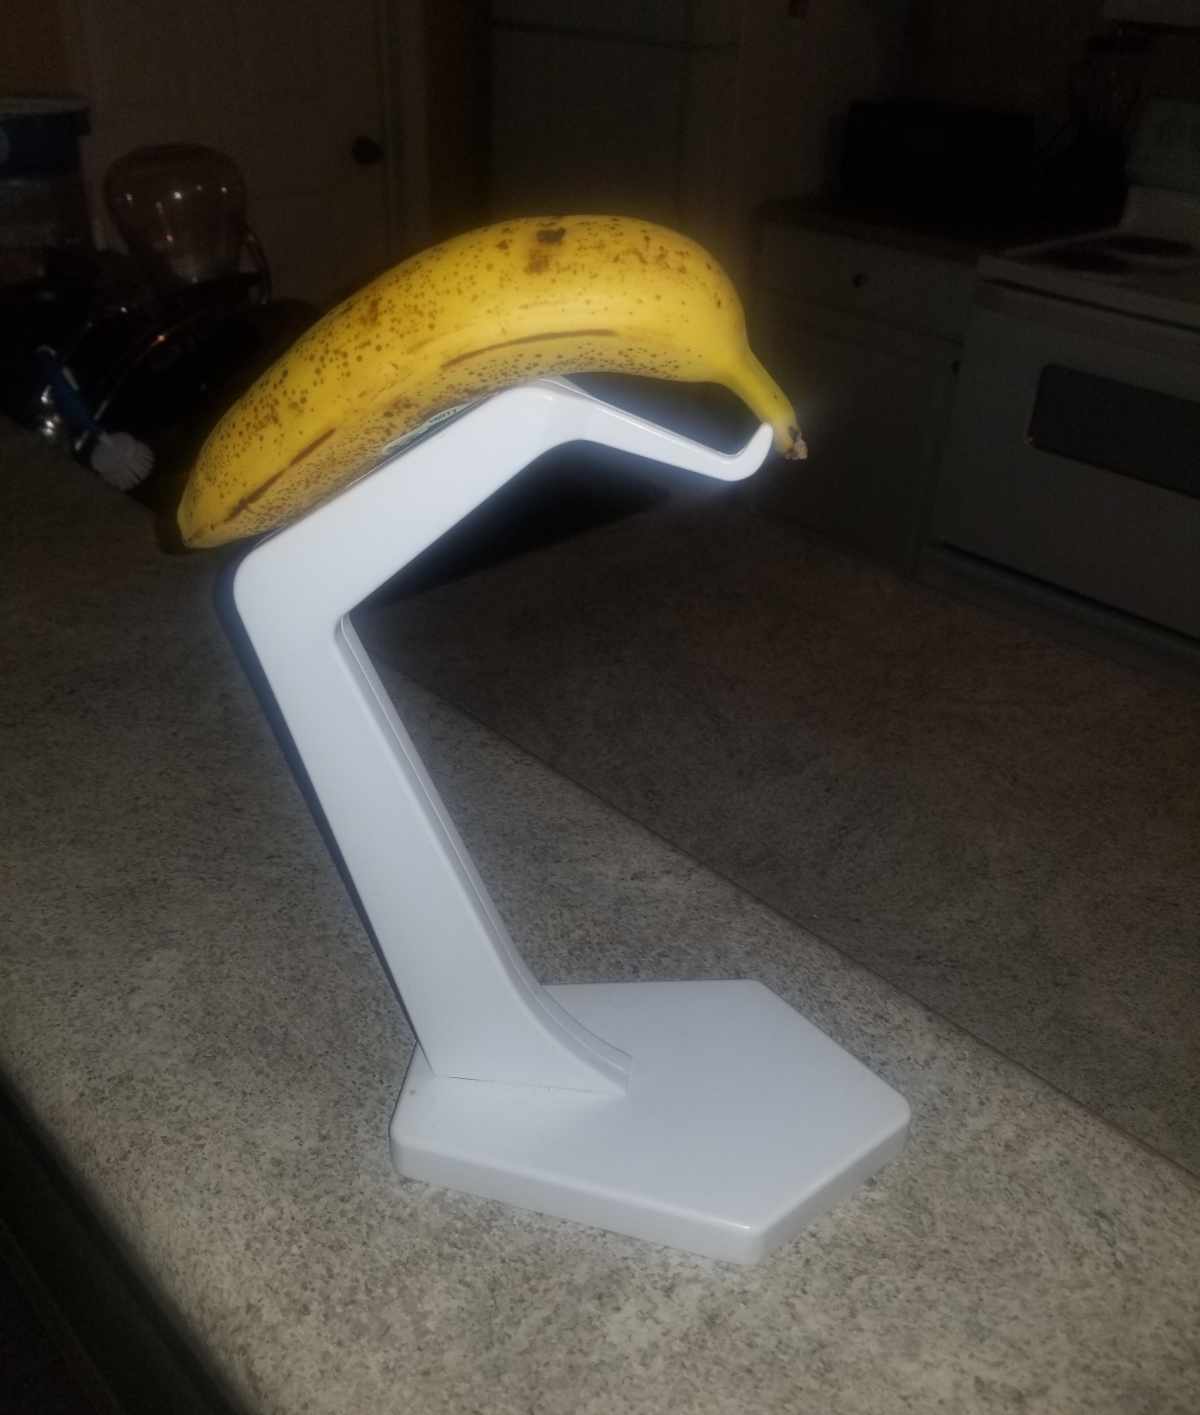 Got a banana stand today, this was worth the money